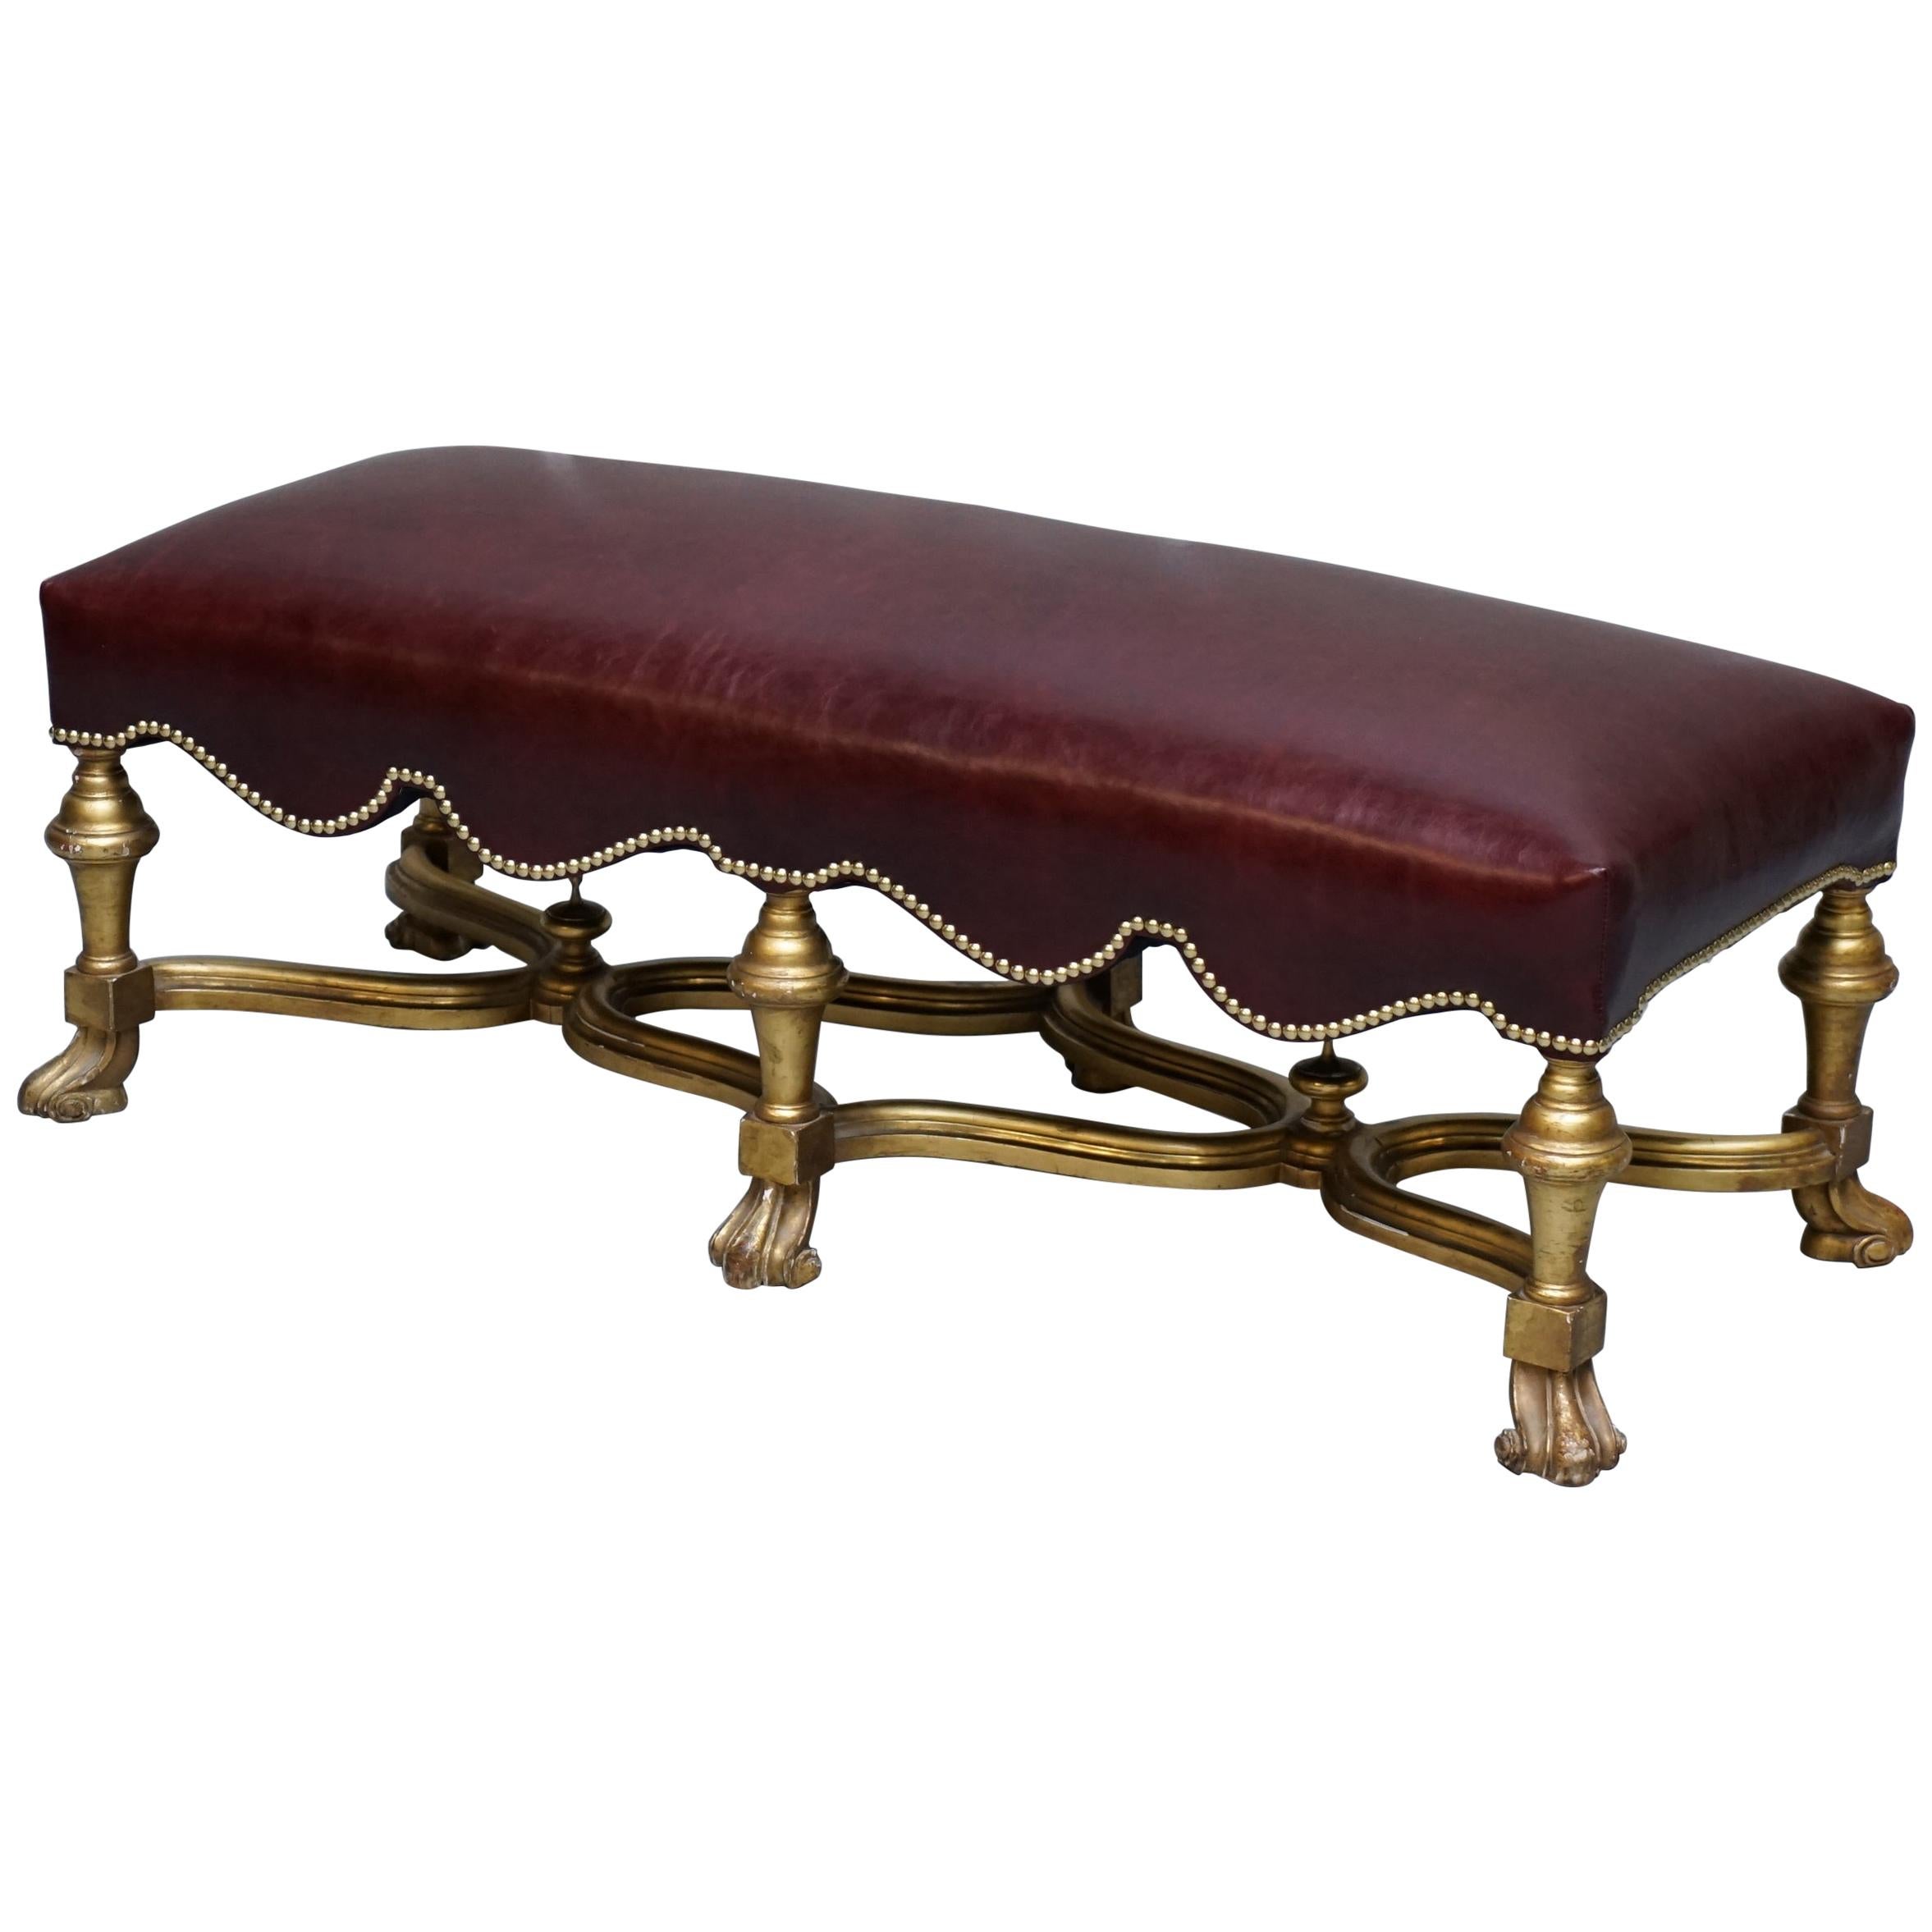 Italian Baroque Style Gold Giltwood Bench Stool New Oxblood Leather, circa 1800 For Sale